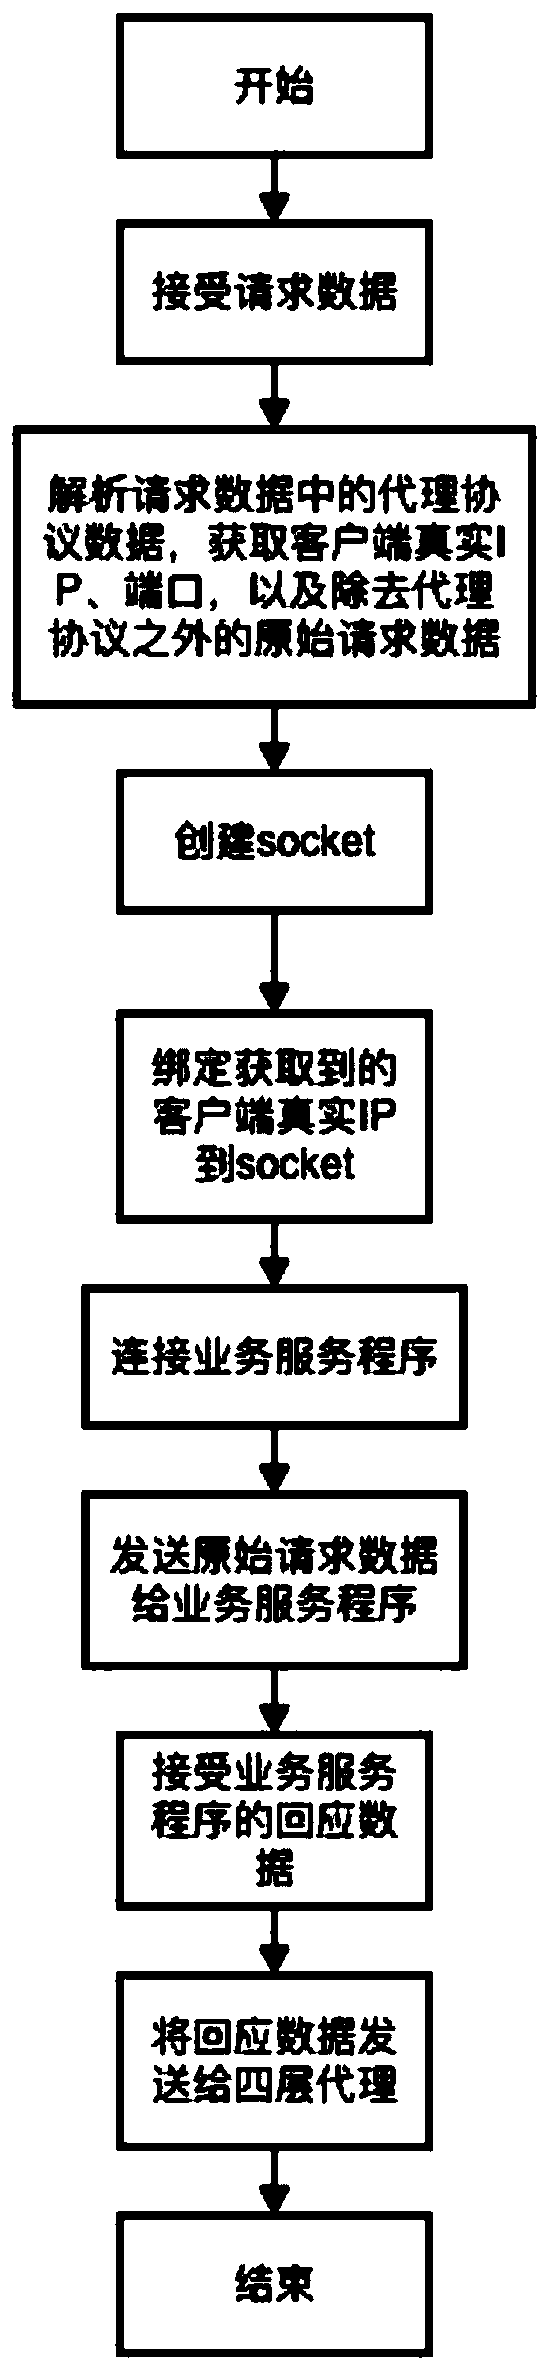 Method for obtaining real IP of client in four-layer proxy network environment